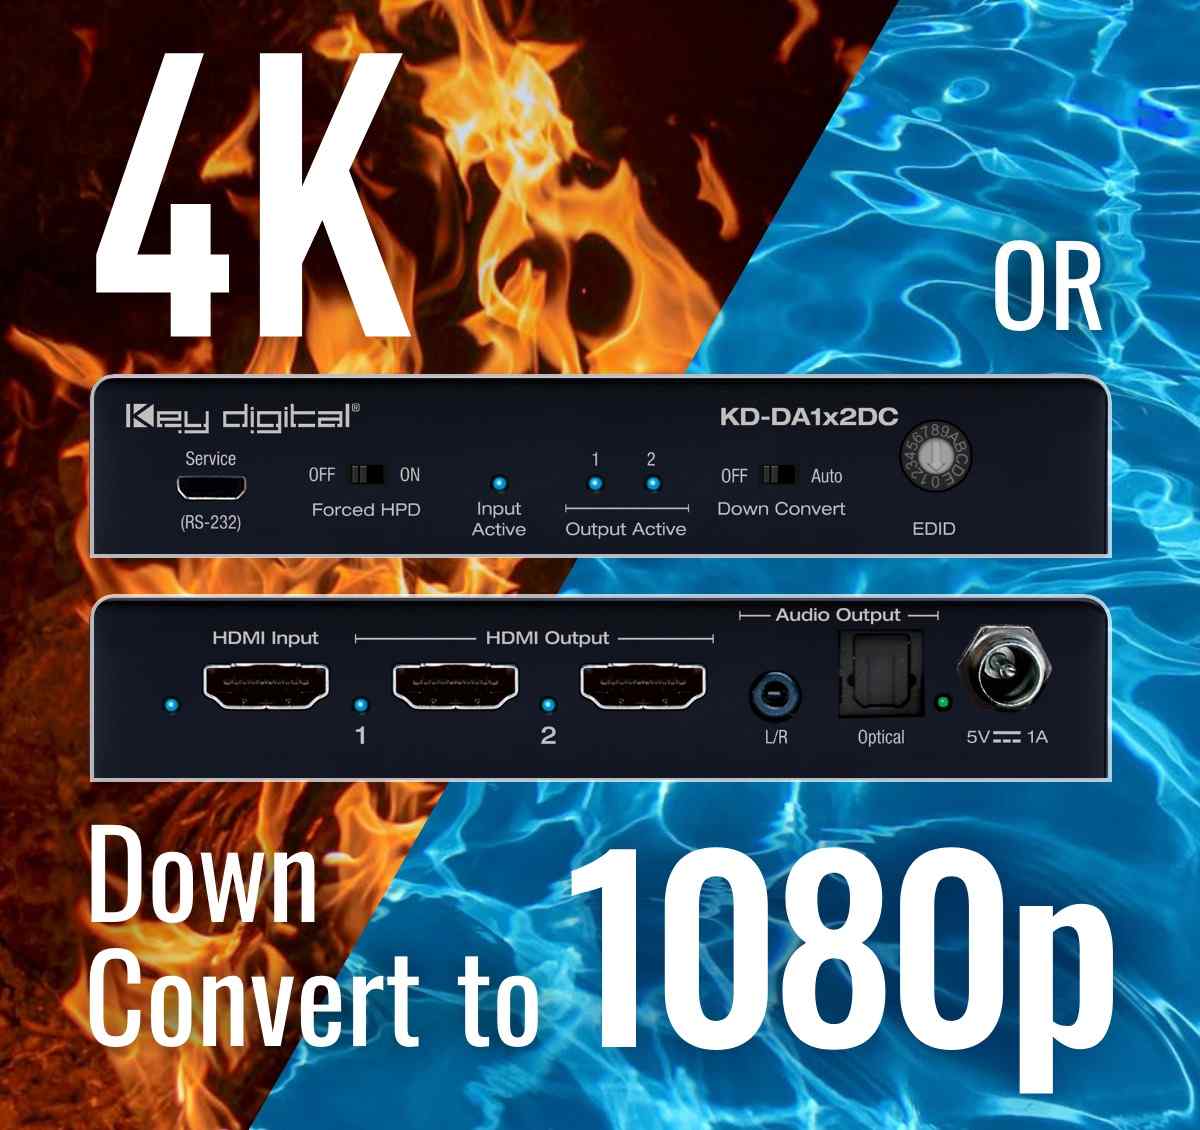 Thumbnail of Example Diagram showing hdmi out splitter 4K down convert  to 1080p